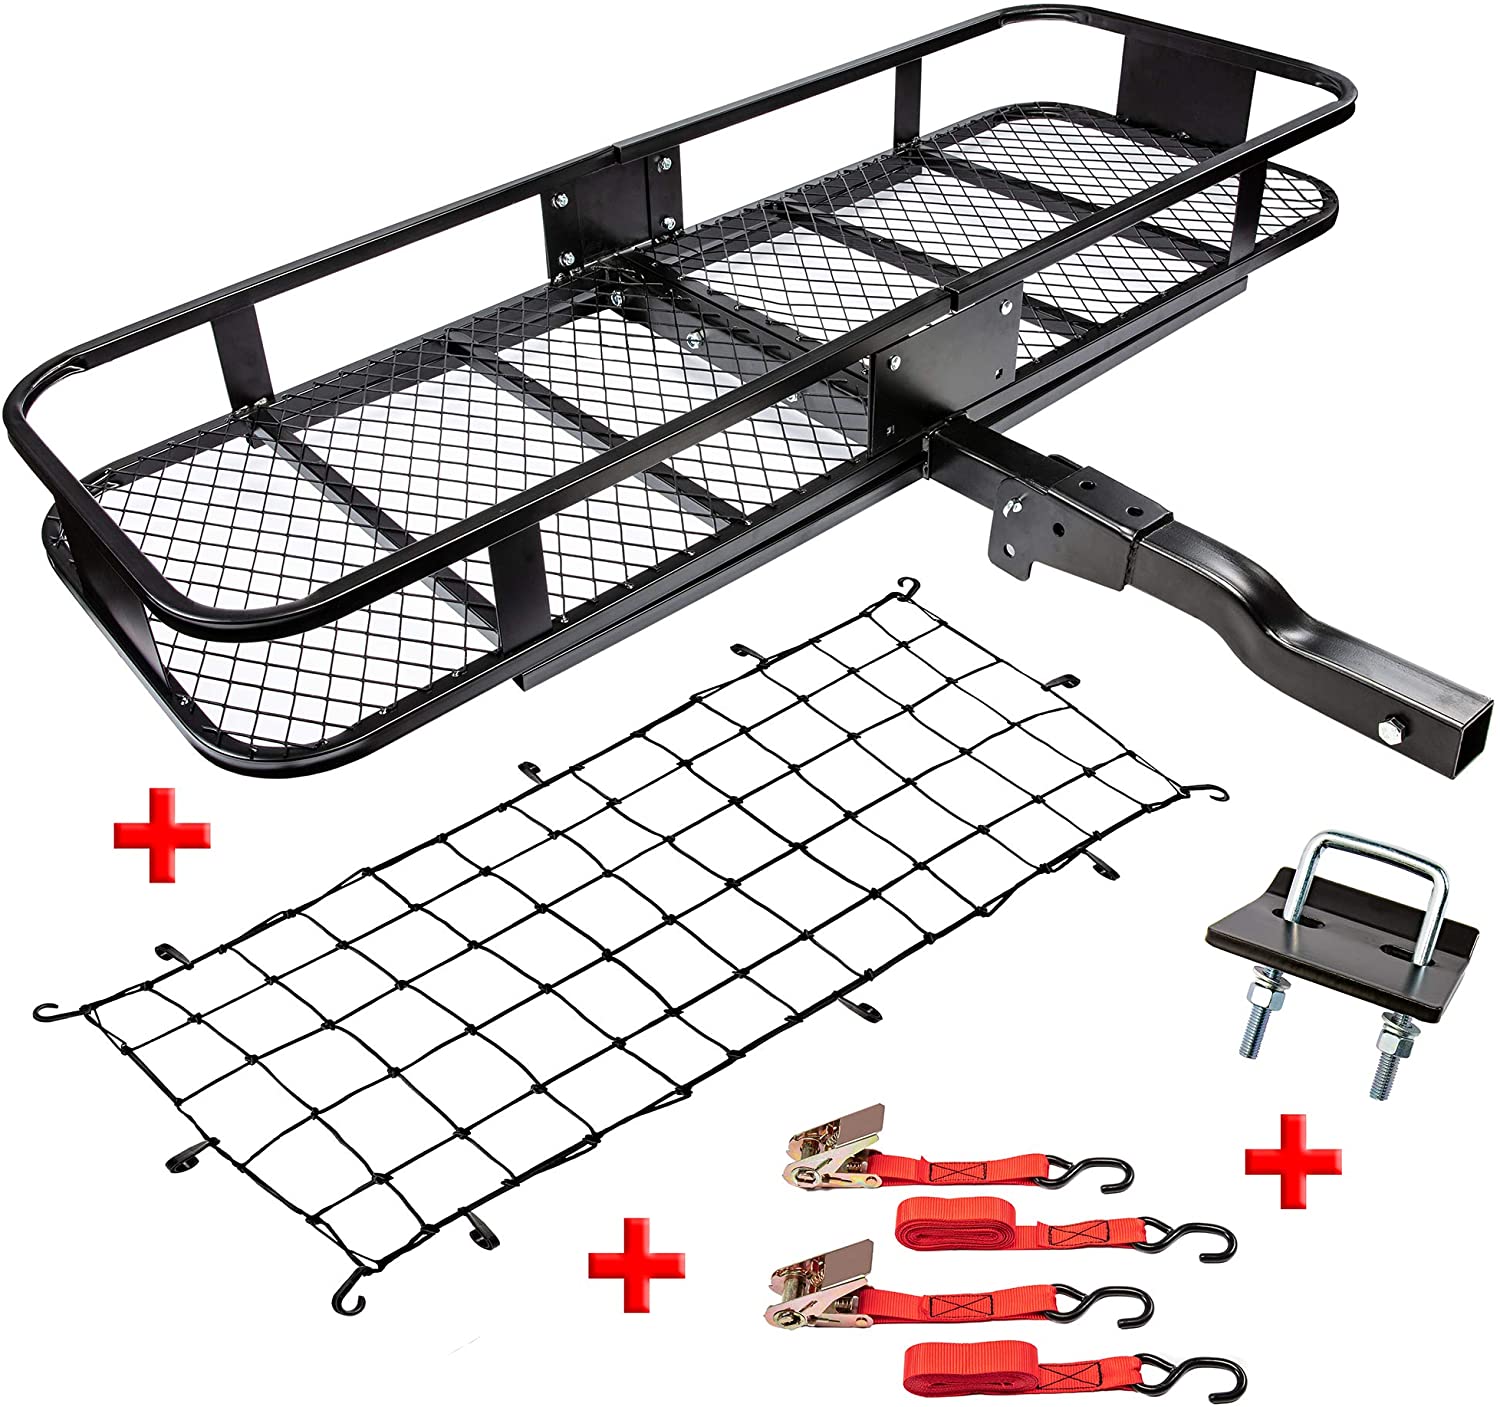 RaxGo Hitch Mount Cargo Carrier Set with 60” x 20” x 6” Steel Hitch Hauler Basket, Elastic Cargo Net with Attachment Hooks, Two Water-Resistant Ratchet Straps & Two Regular Straps [500 Pound Capacity] (Cargo Hitch Hauler)